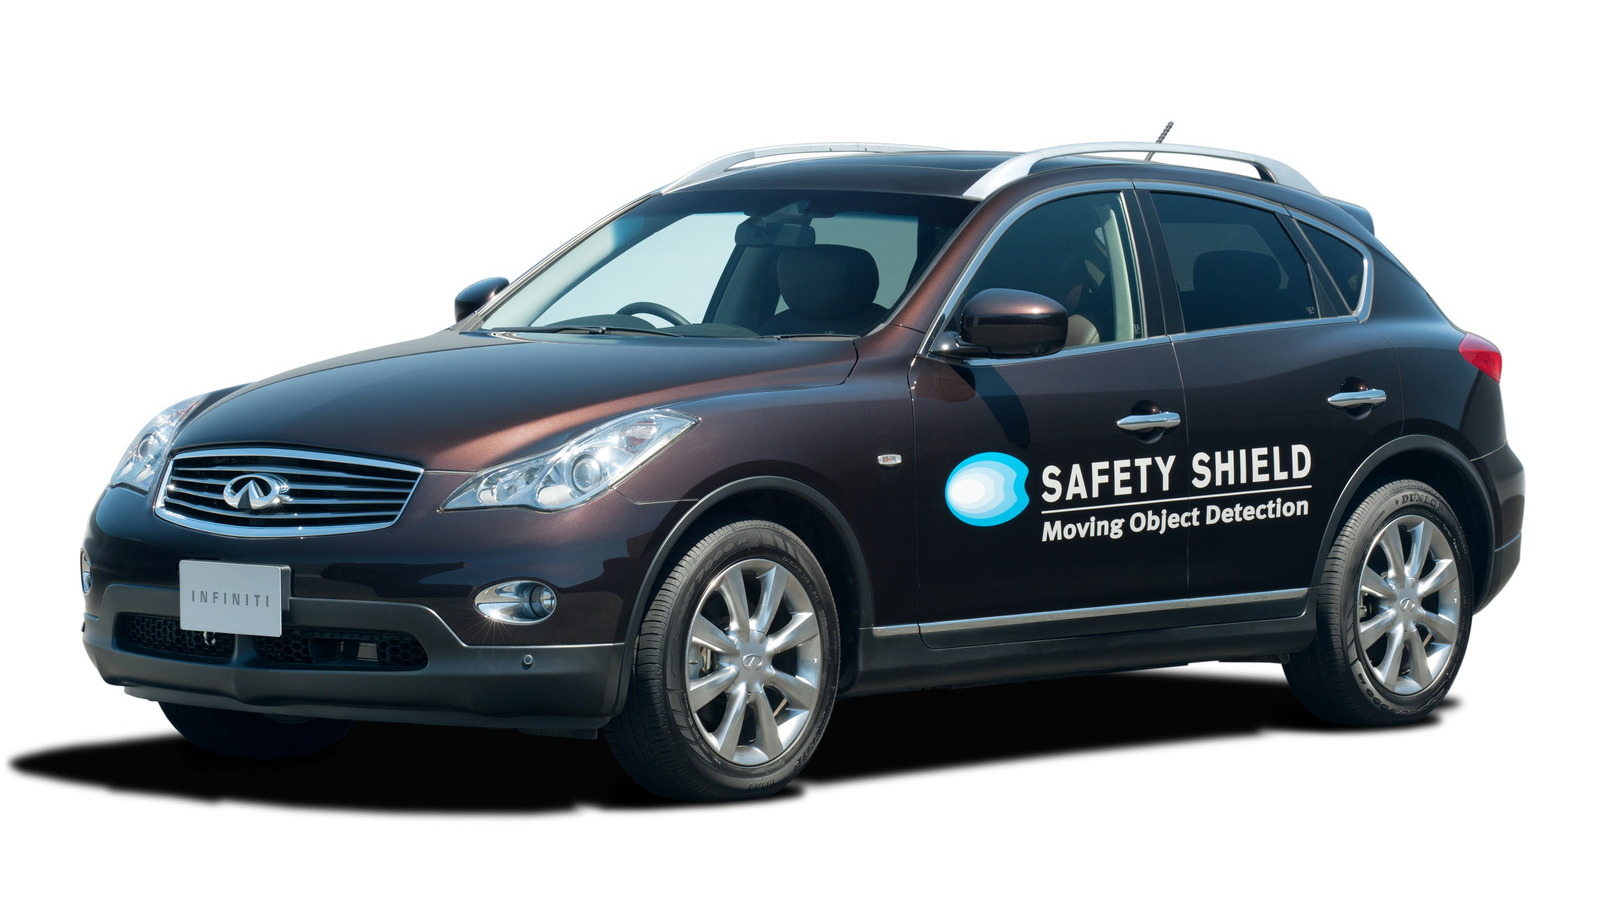 Nissan's new Moving Object Detection and forward collision avoidance systems